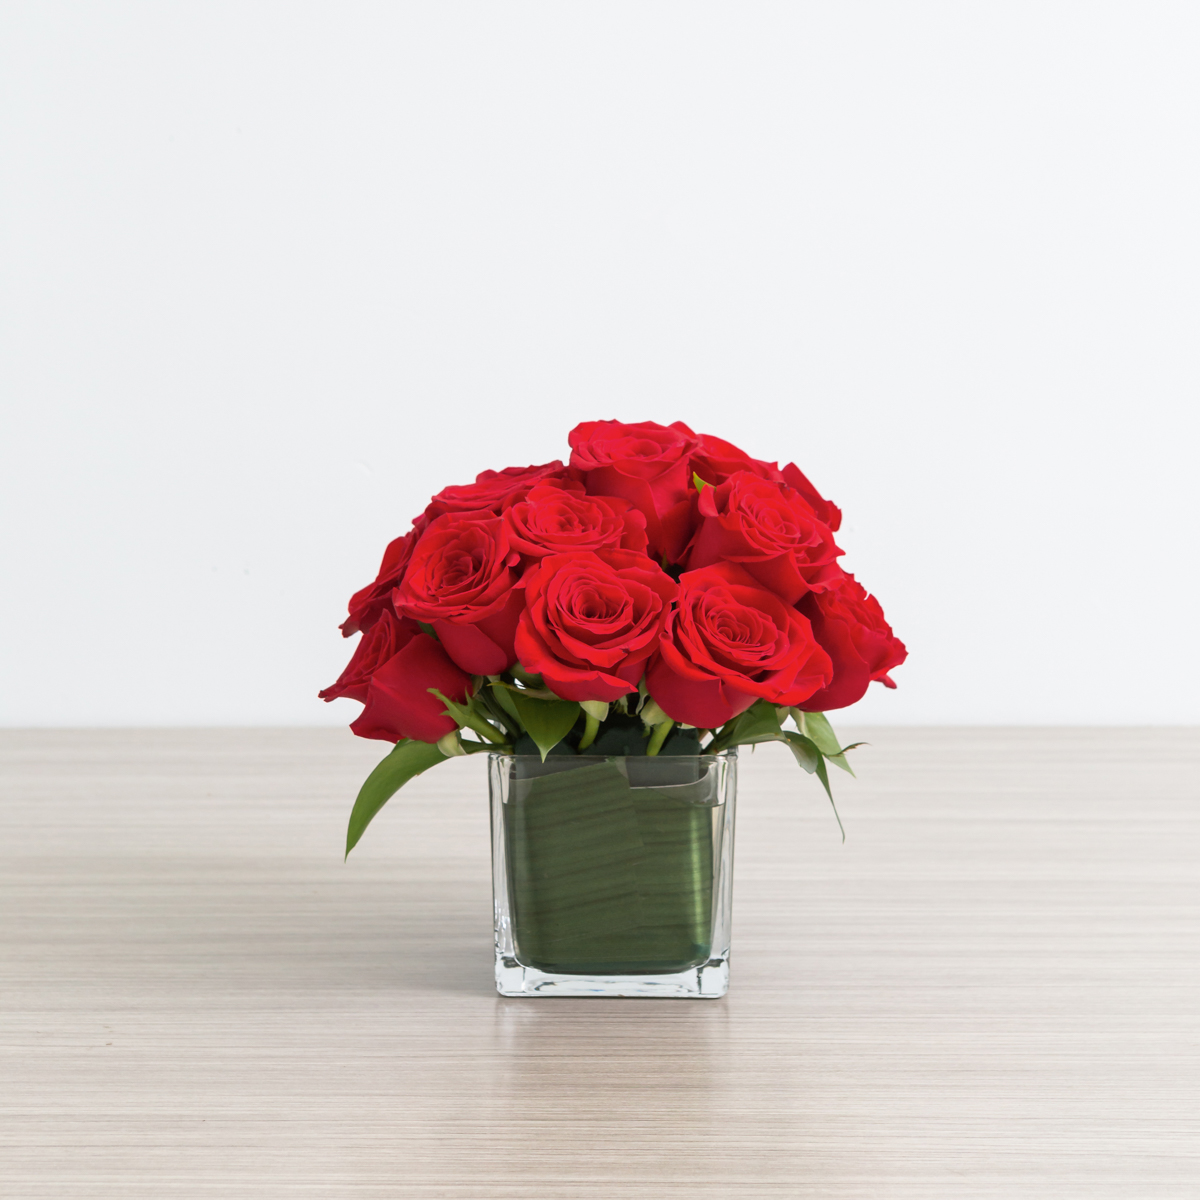 Classic red roses in a cube vase